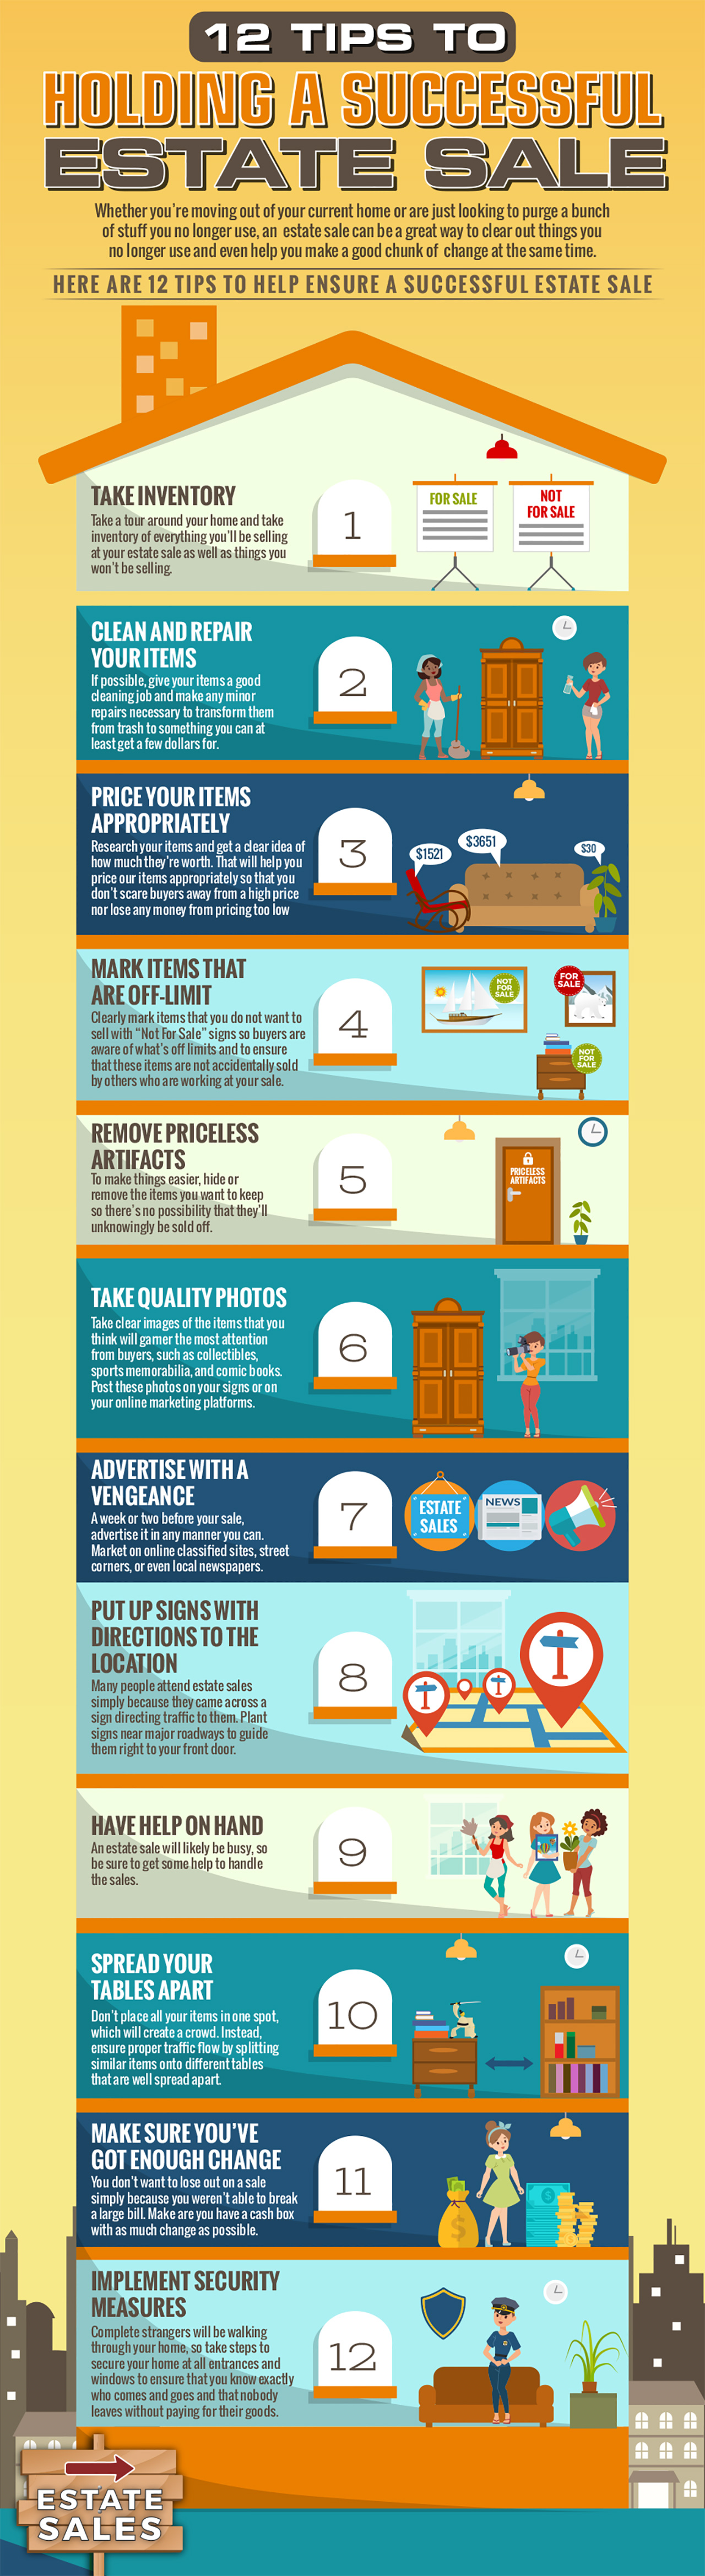 12-tips-to-holding-a-successful-estate-sale-infographic